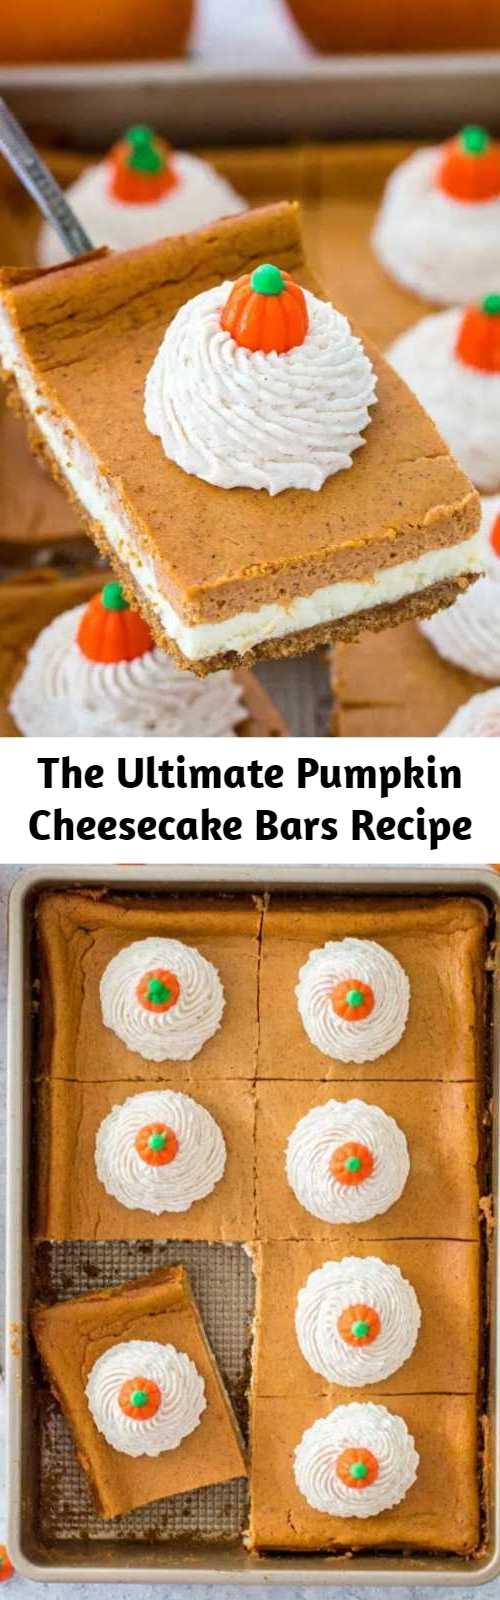 The Ultimate Pumpkin Cheesecake Bars Recipe - Pumpkin Cheesecake Bars are luxuriously creamy and rich, with lots of pumpkin flavor. Topped with a hefty amount of homemade cinnamon whipped cream.